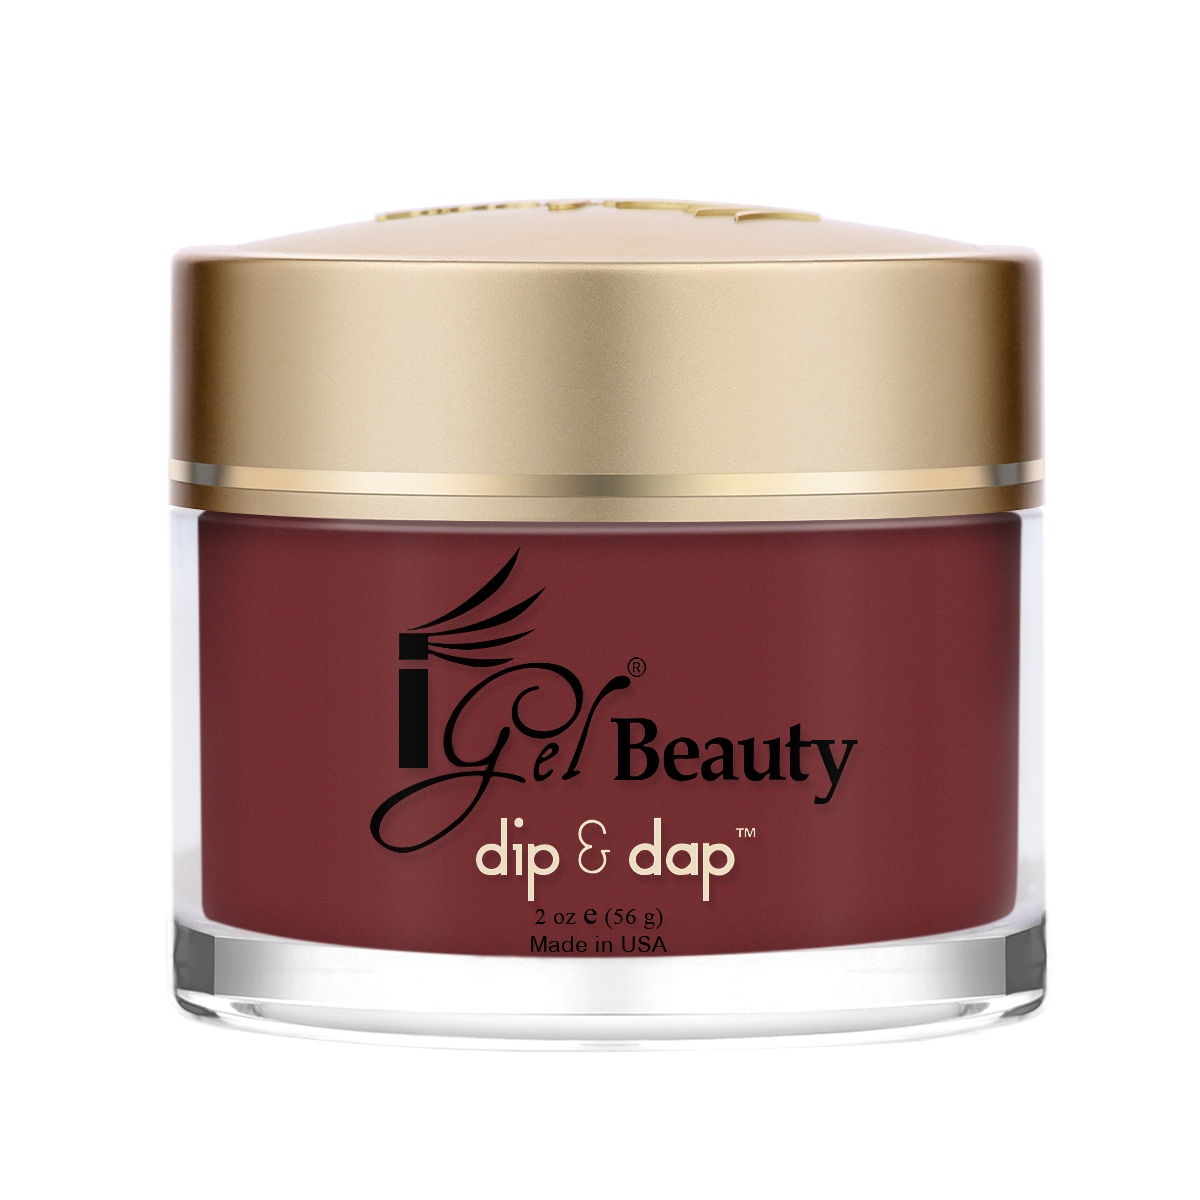 DD301 Never Give Up Dip and Dap Powder 2oz By IGel Beauty